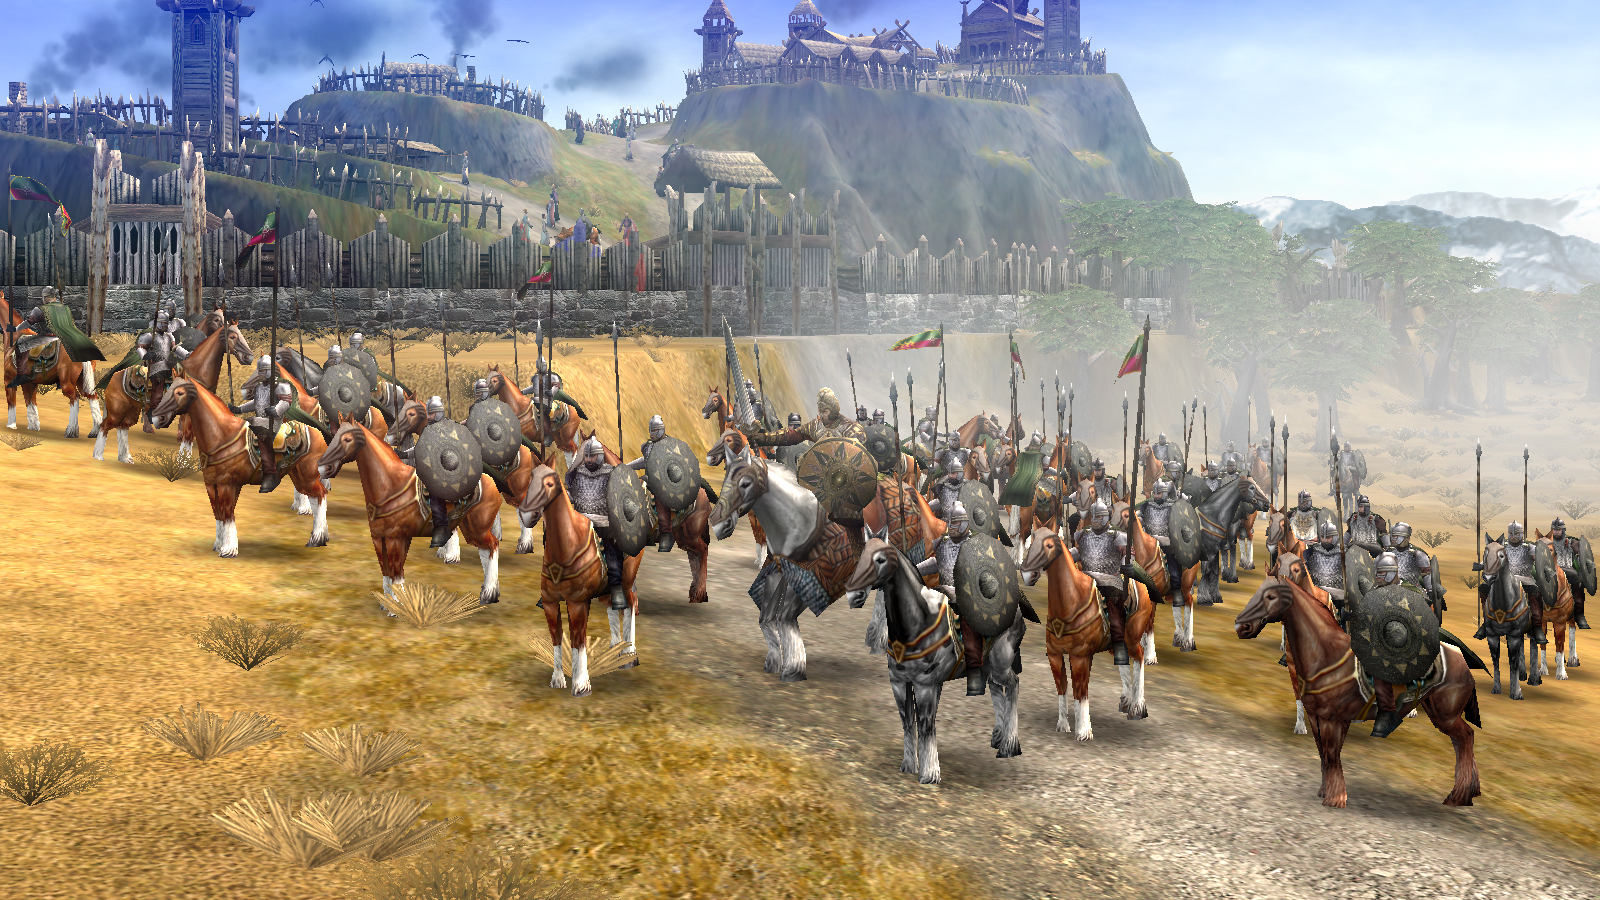 Rohan cavalry in formation in the Battle for Middle-earth